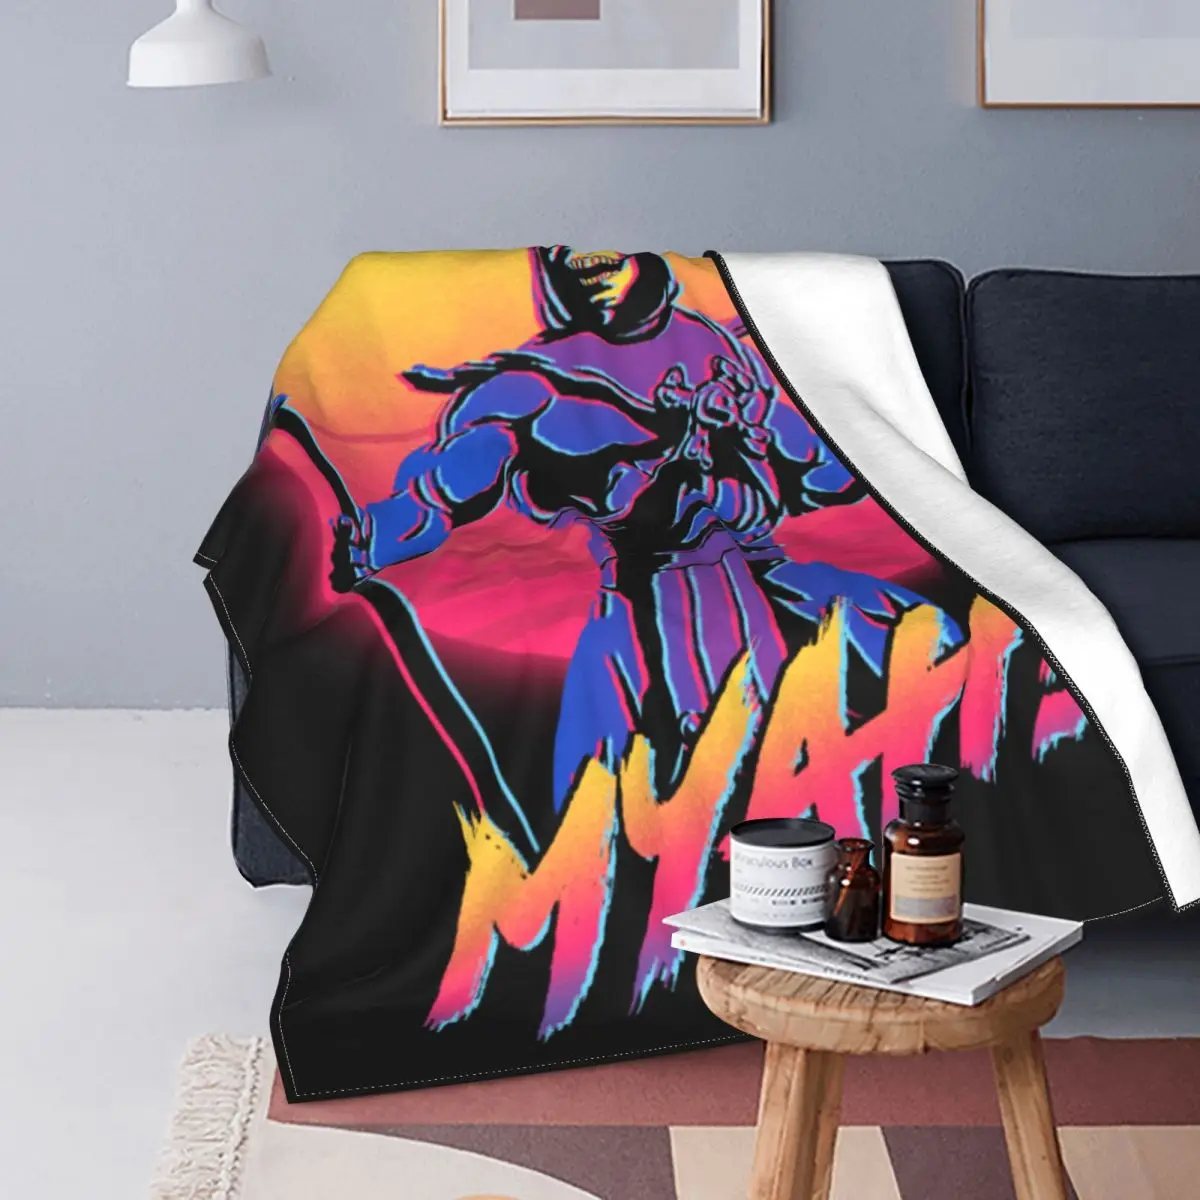 

Blankets Soft Flannel Winter Skeletor She-Ra Beast Throw He-Man Masters Of The Universe Blanket for Couch Outdoor Bedding